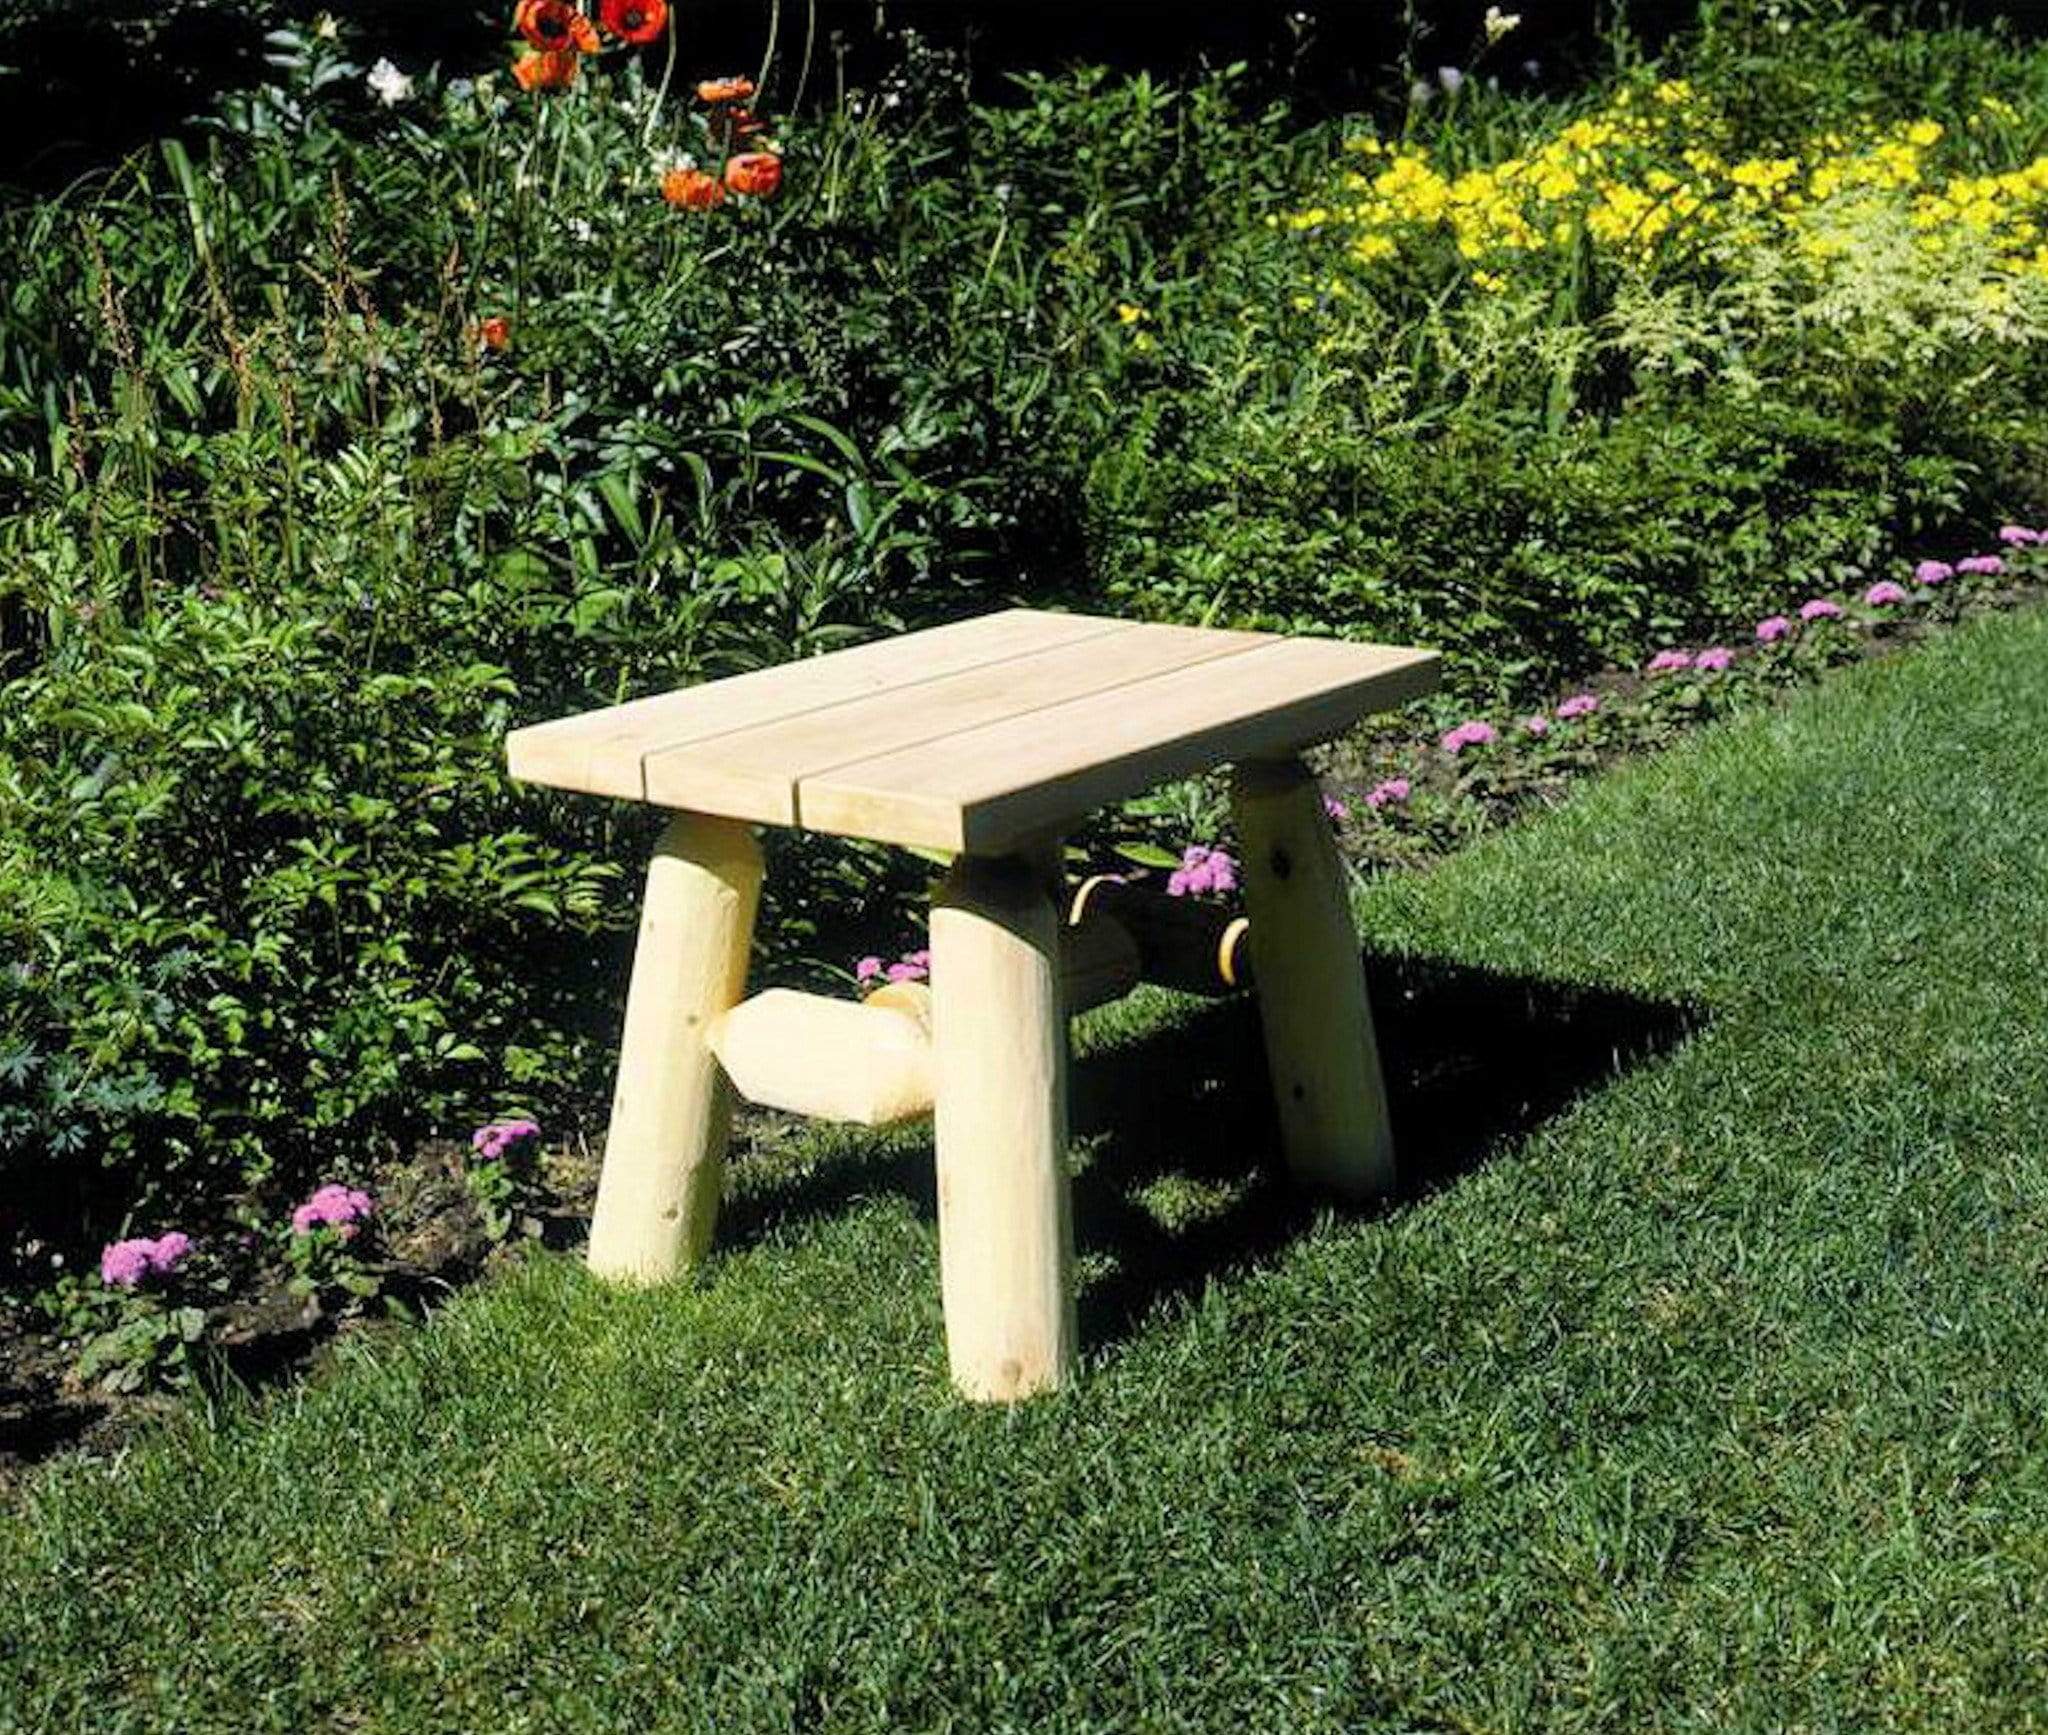 HomeRoots Outdoors Living Room > Tables Natural / Wood 23" X 17" X 18"  Natural Wood End Table